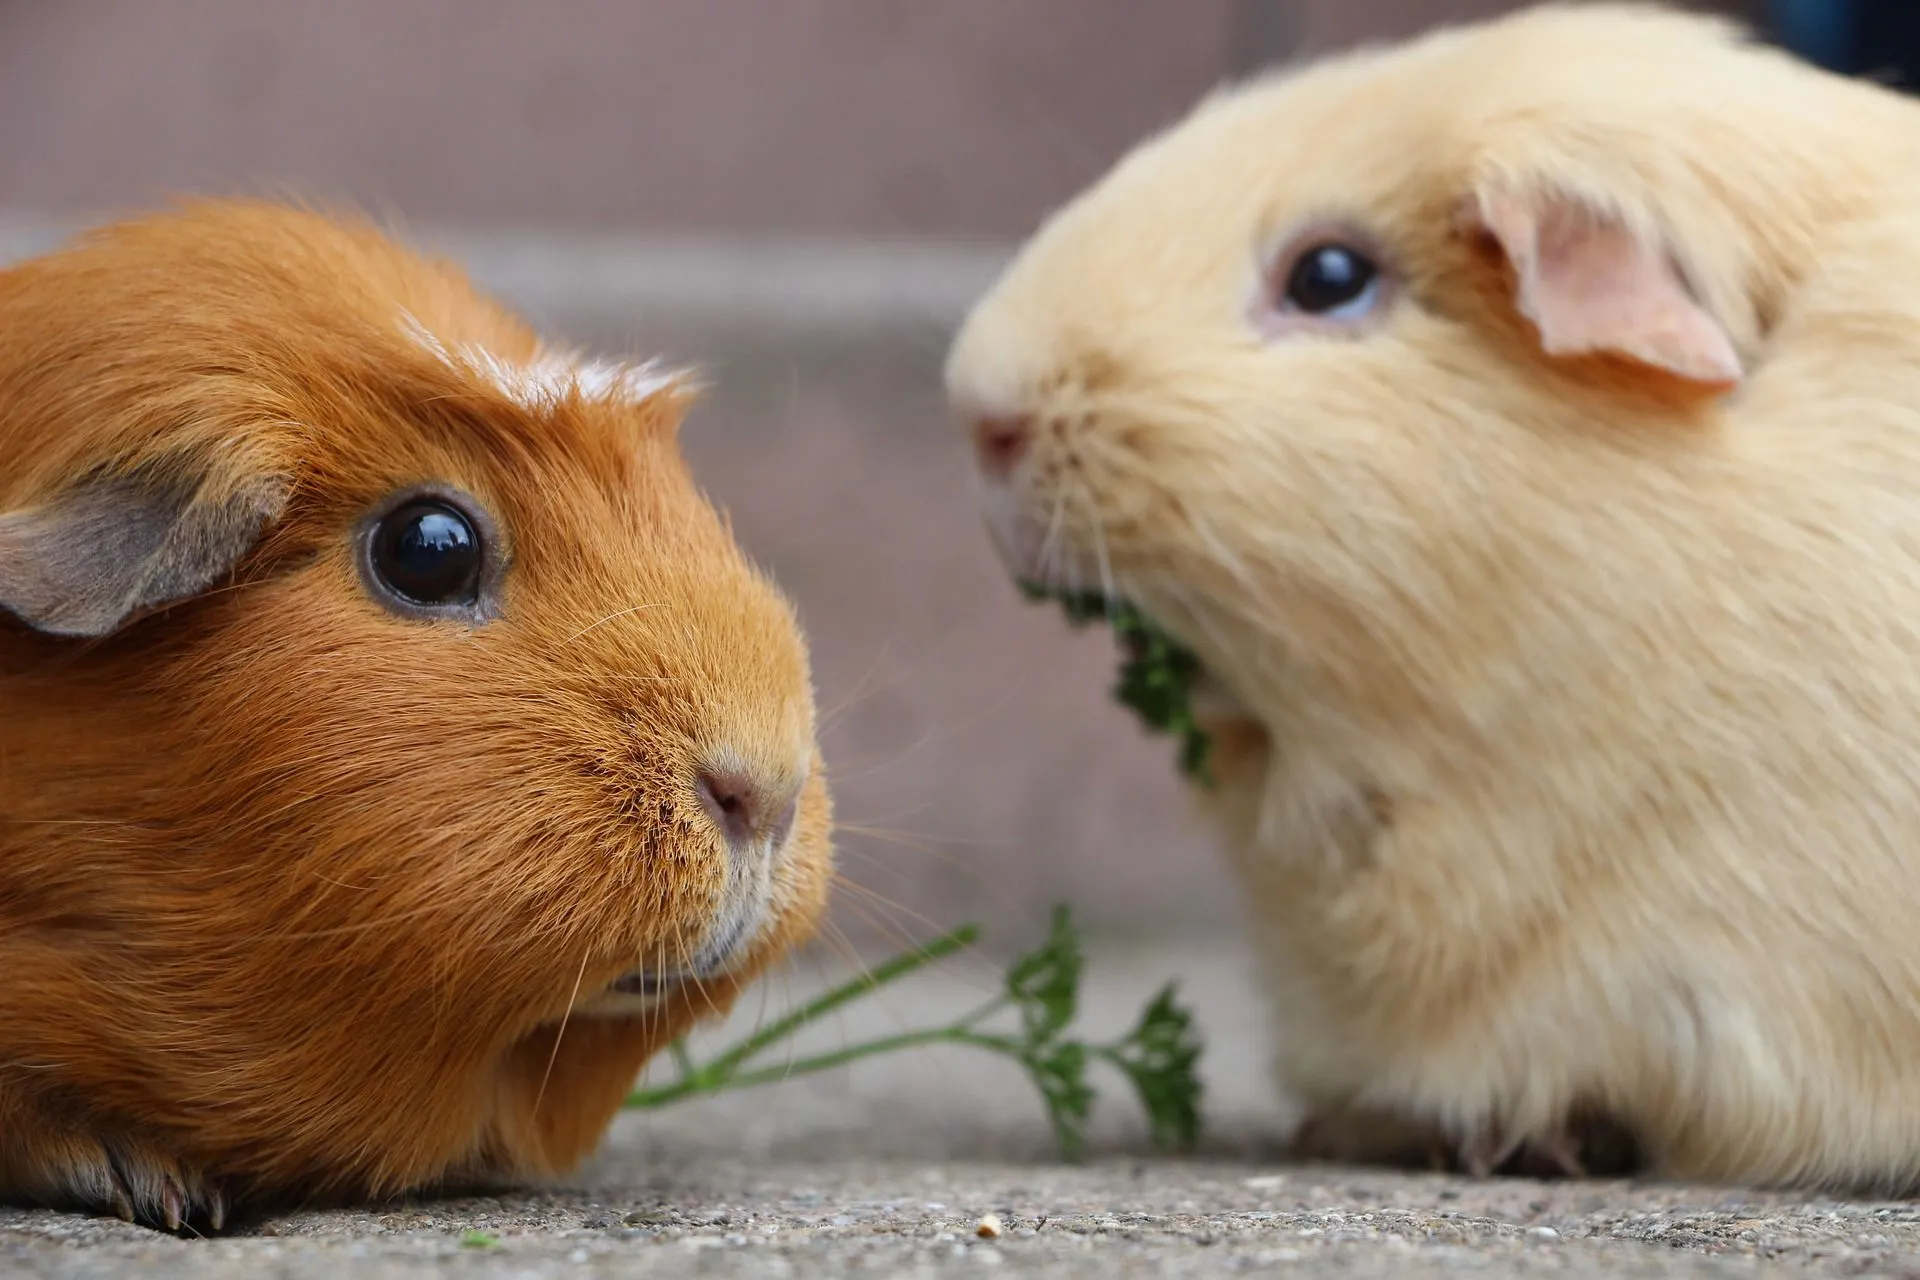 Guinea pigs can eat all types of fresh pears but only in a very small amount once in a while.